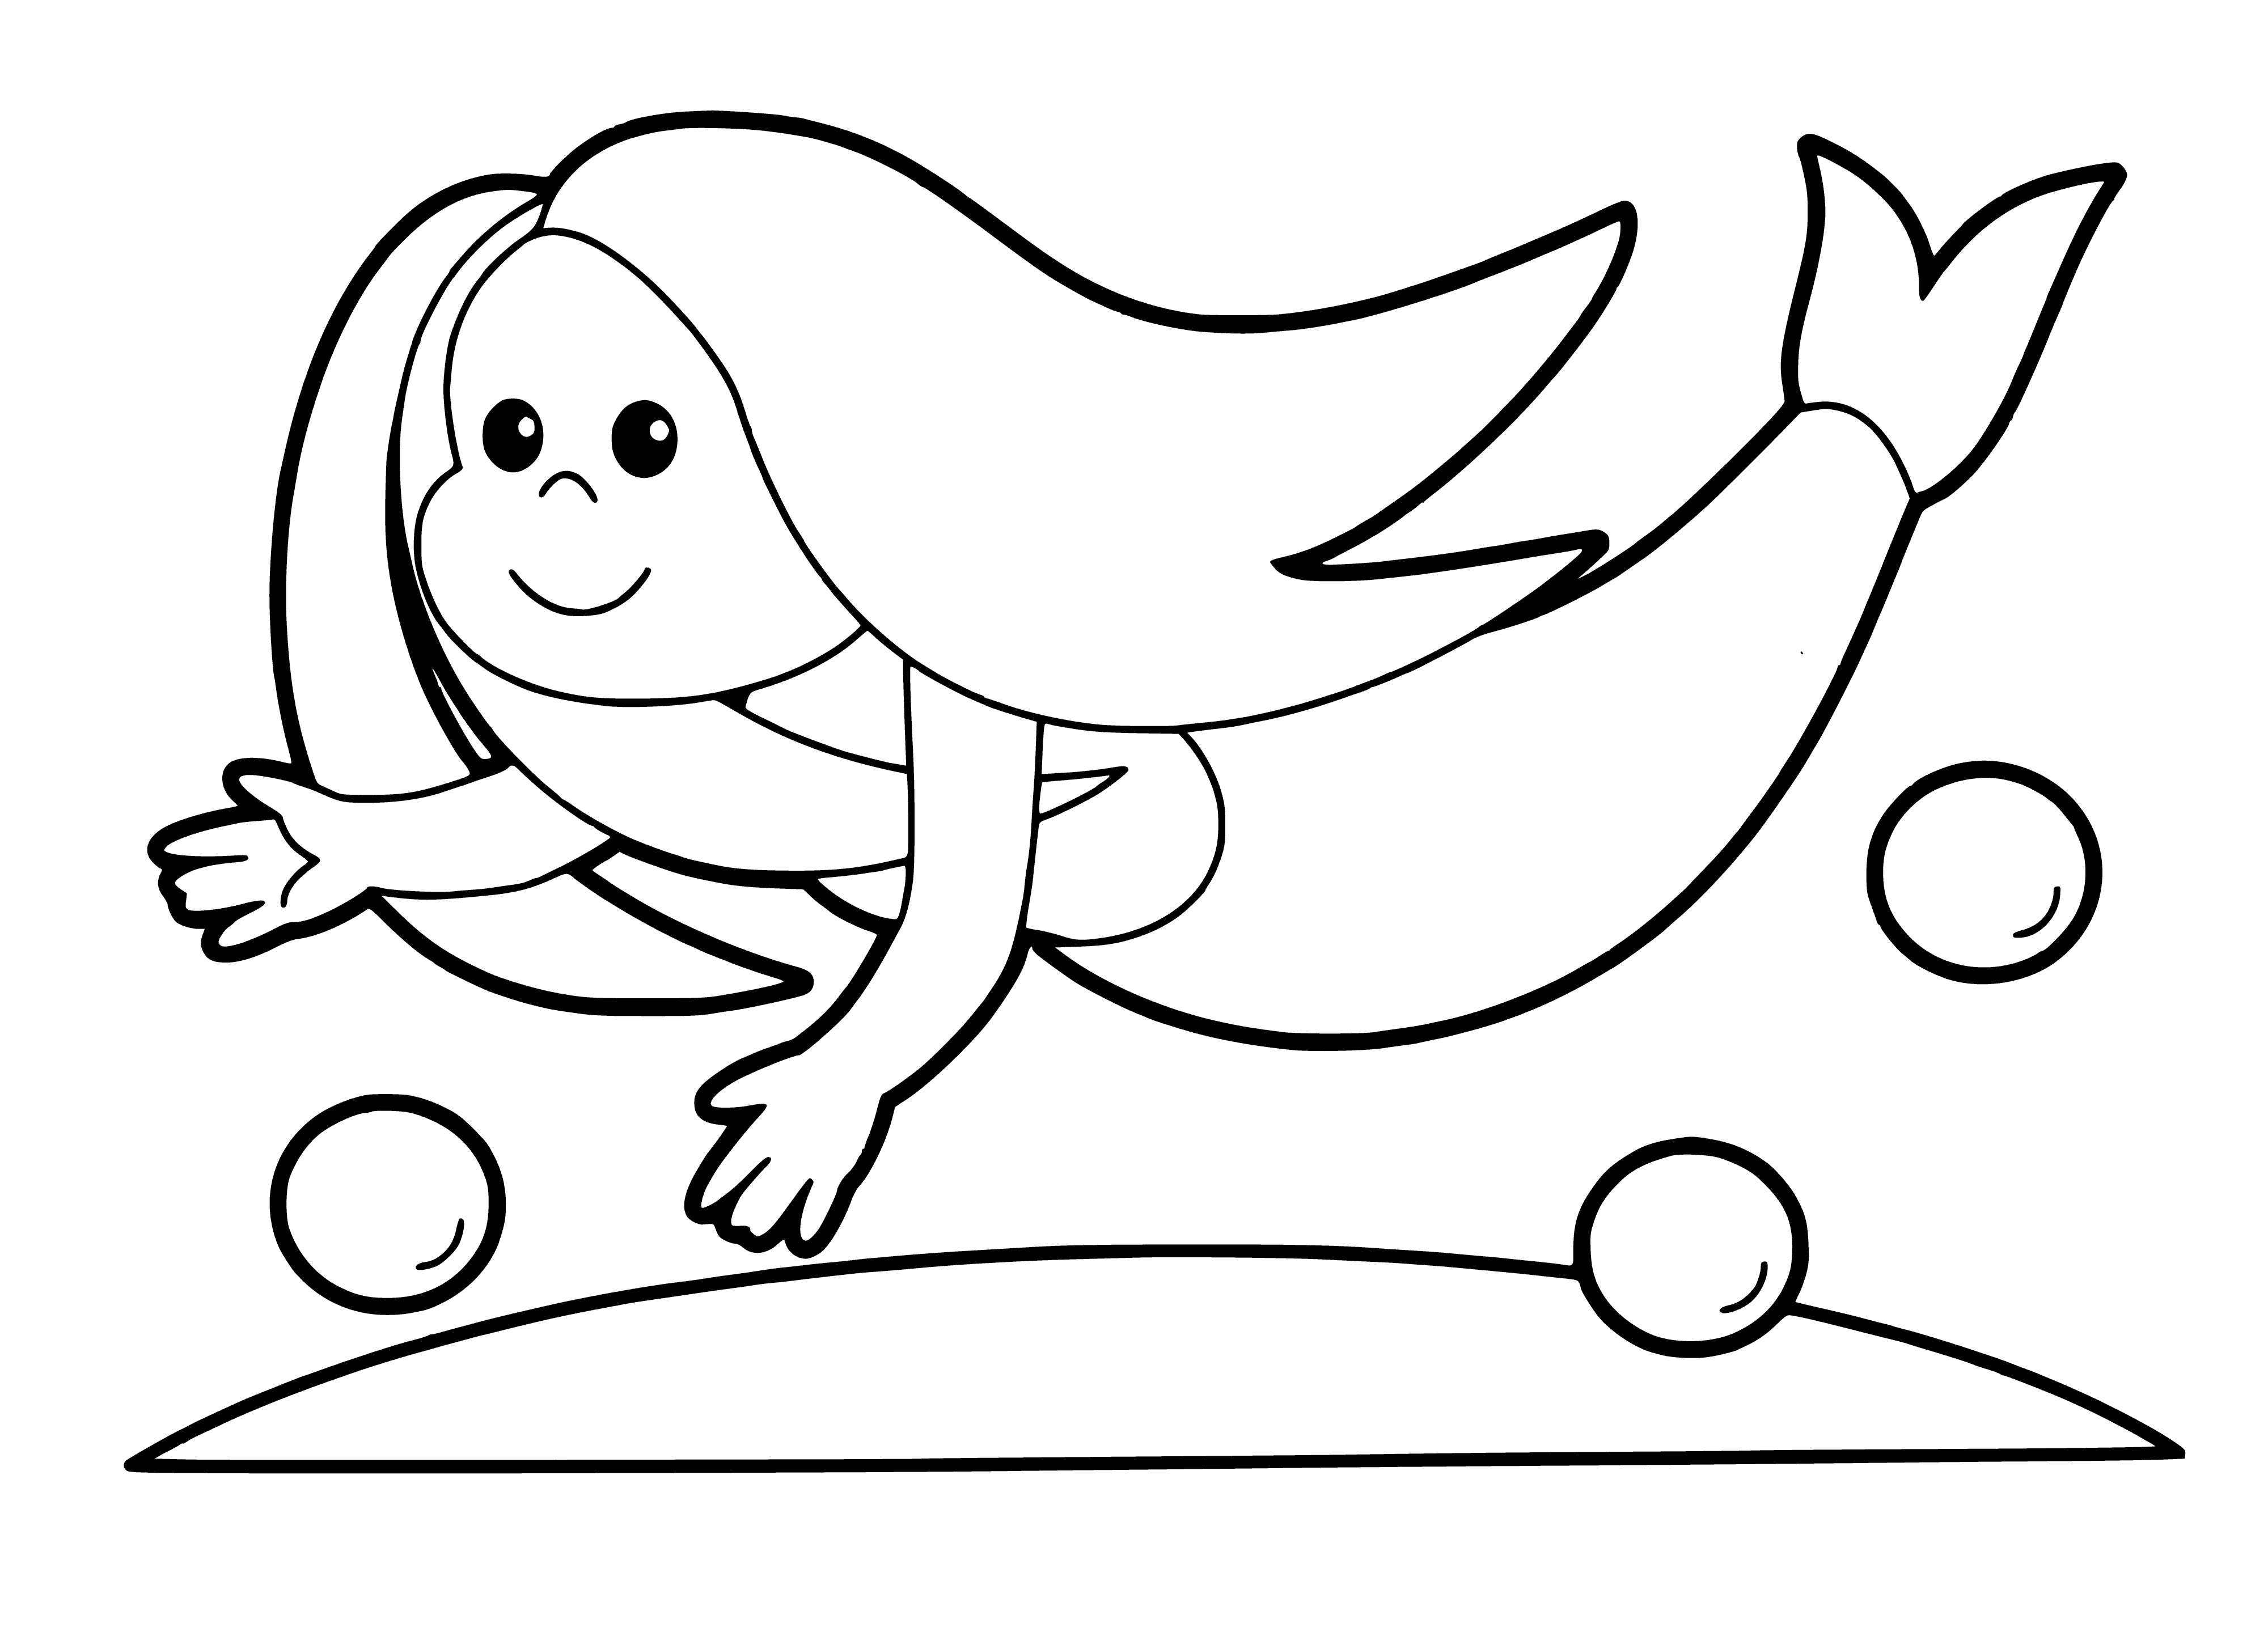 coloring page: Mermaid with flowing blonde hair and colorful tail holds a conch shell to her ear, with a coral reef of colorful fish in the background.